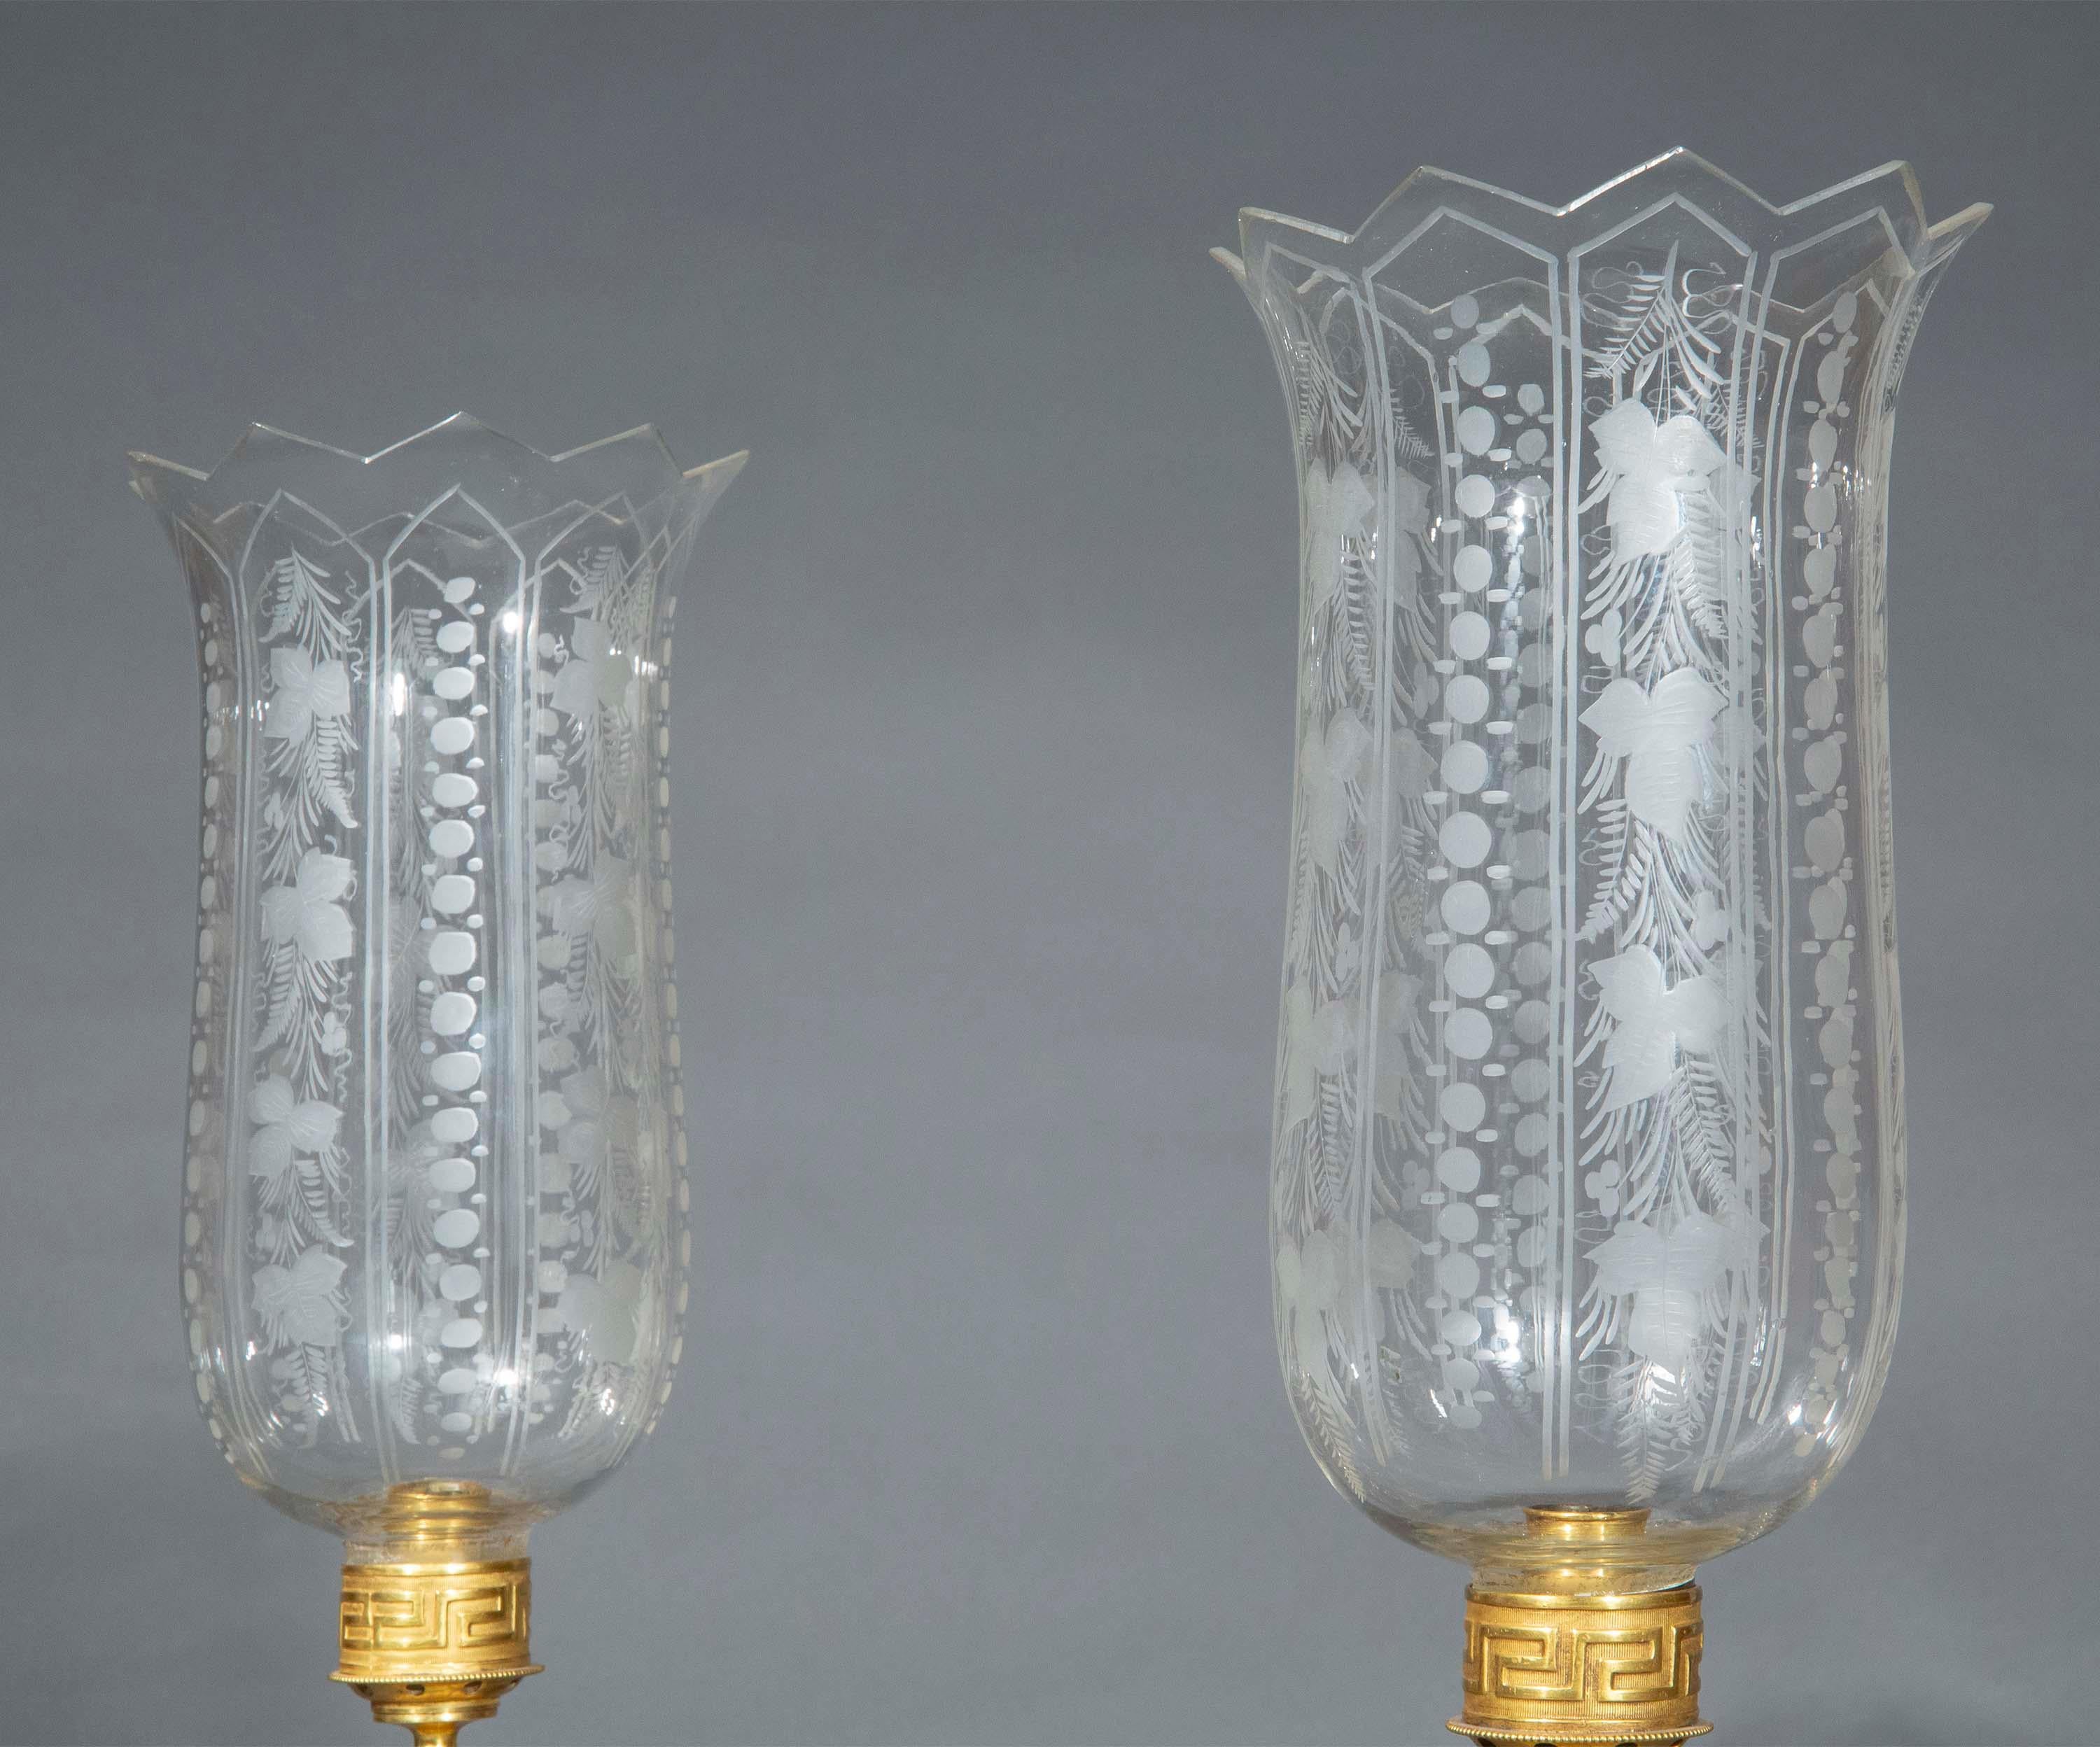 Pair of Early 19th Century Triton Candlesticks Storm Lanterns by Wood & Caldwell In Good Condition For Sale In Richmond, London